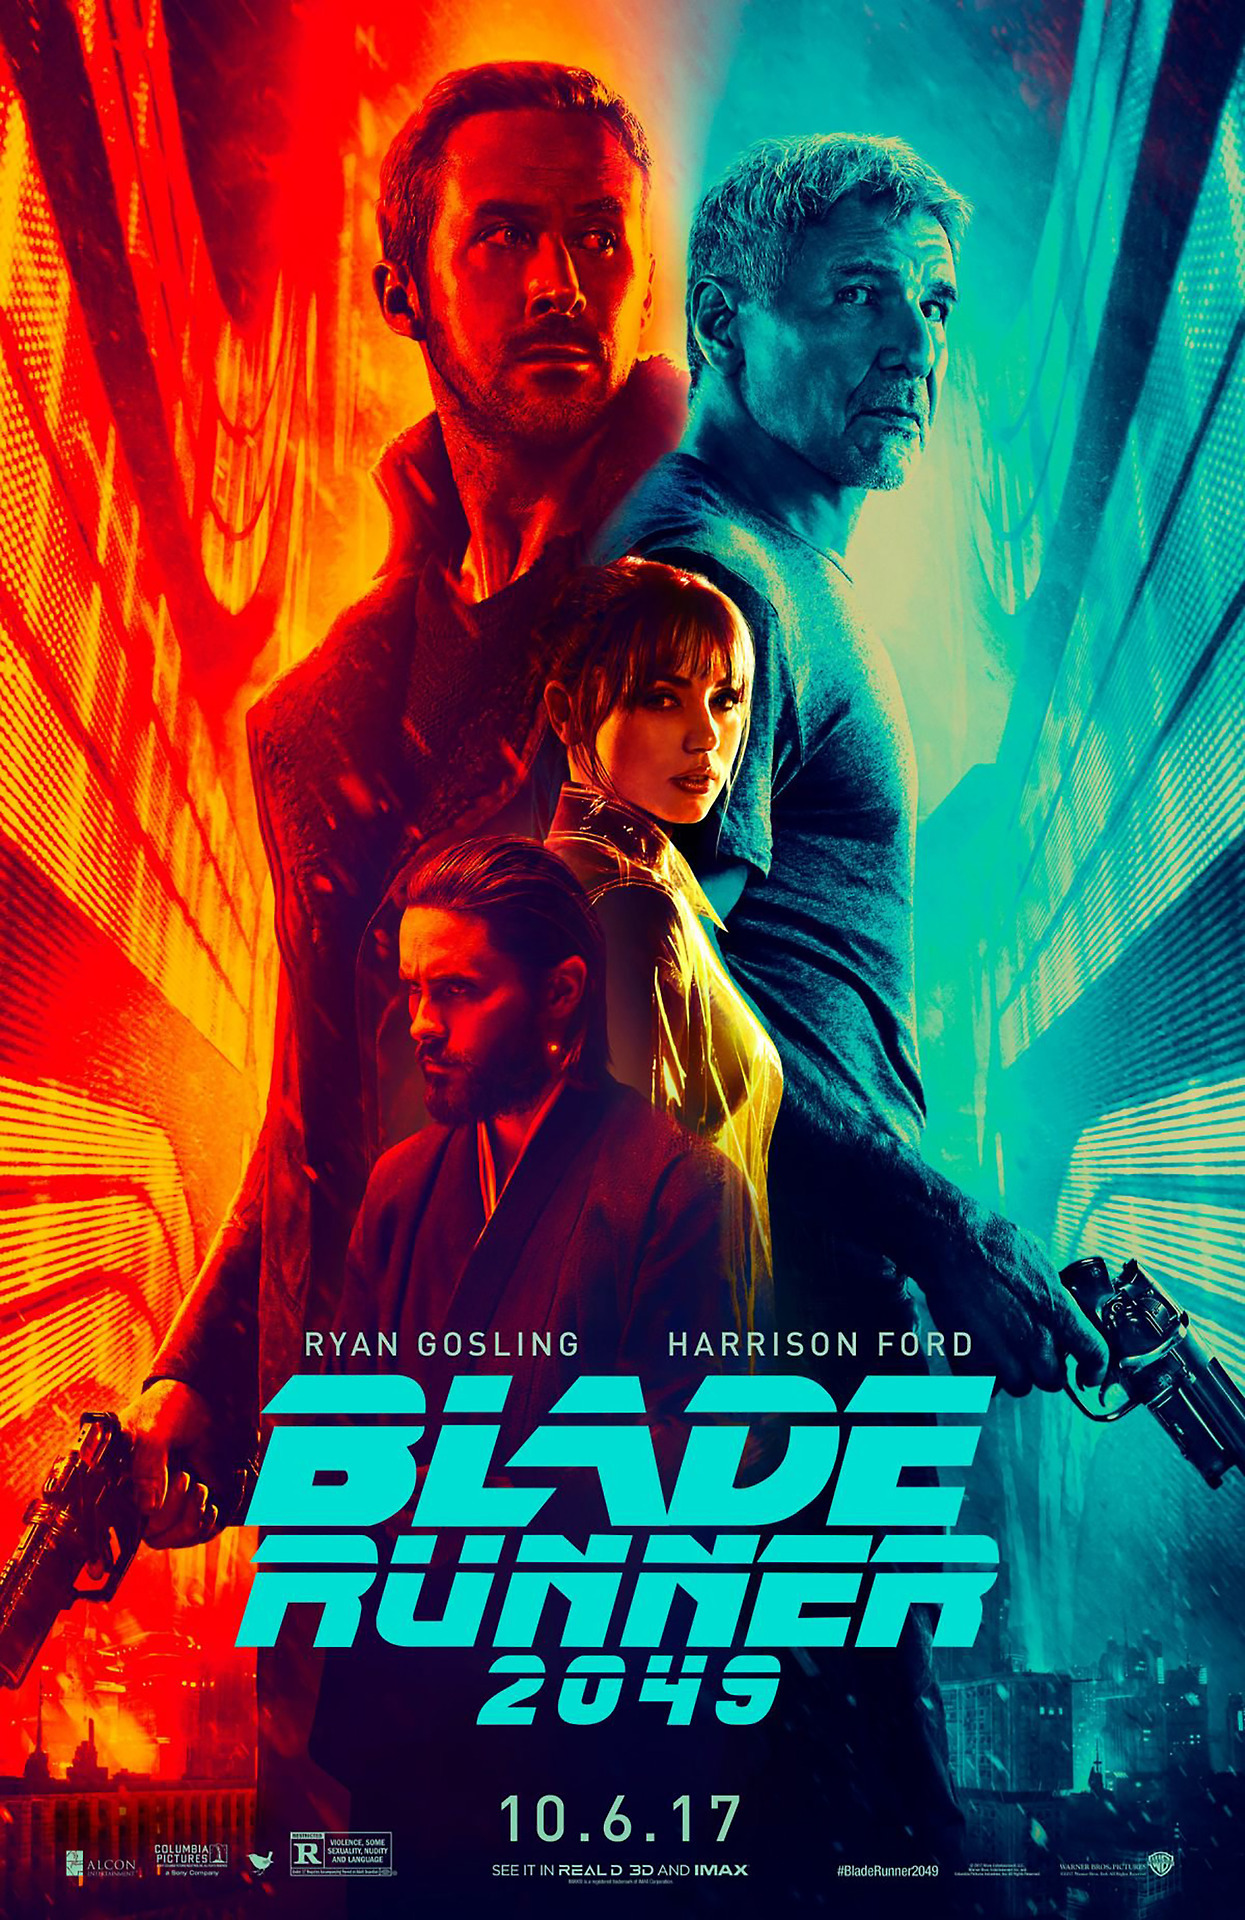 Blade Runner 2049 Is An Impossible Film To Talk About Because The Basic/broad Strokes Of The Plot, Story And C…